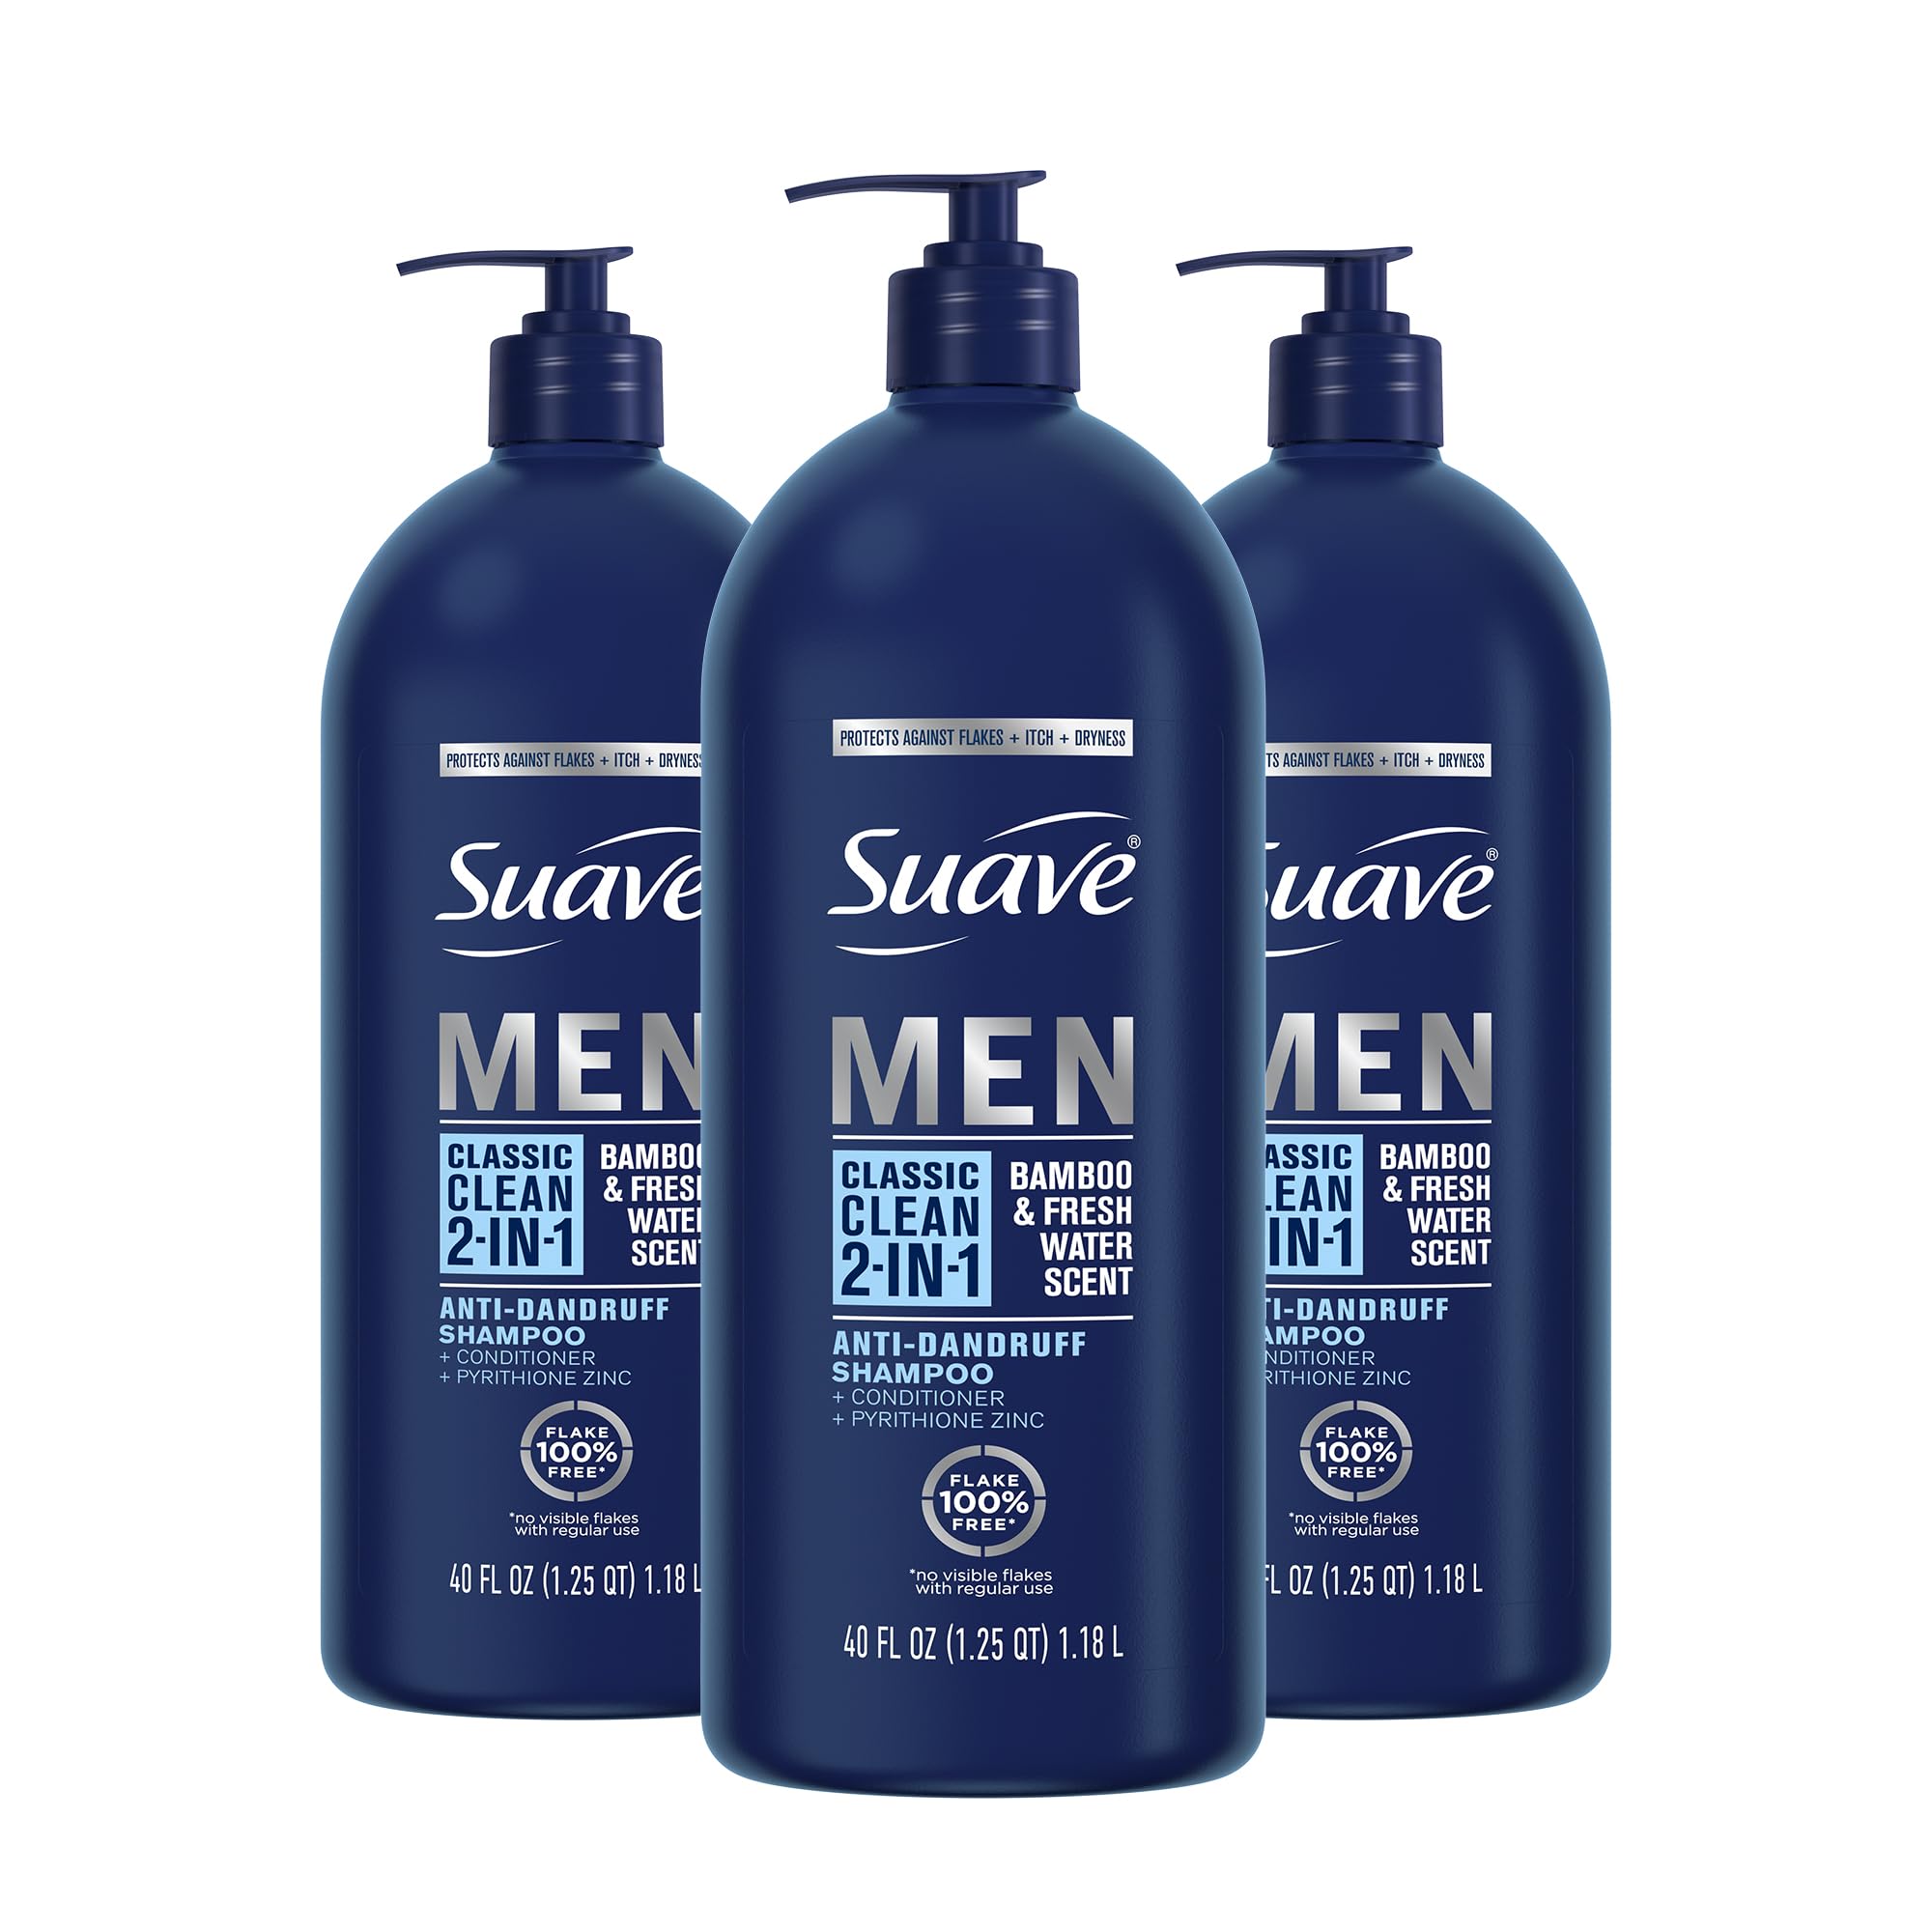 Suave Men 2 in 1 Anti Dandruff Shampoo and Conditioner, Classic Clean with Bamboo scent, 40 oz Pack of 3